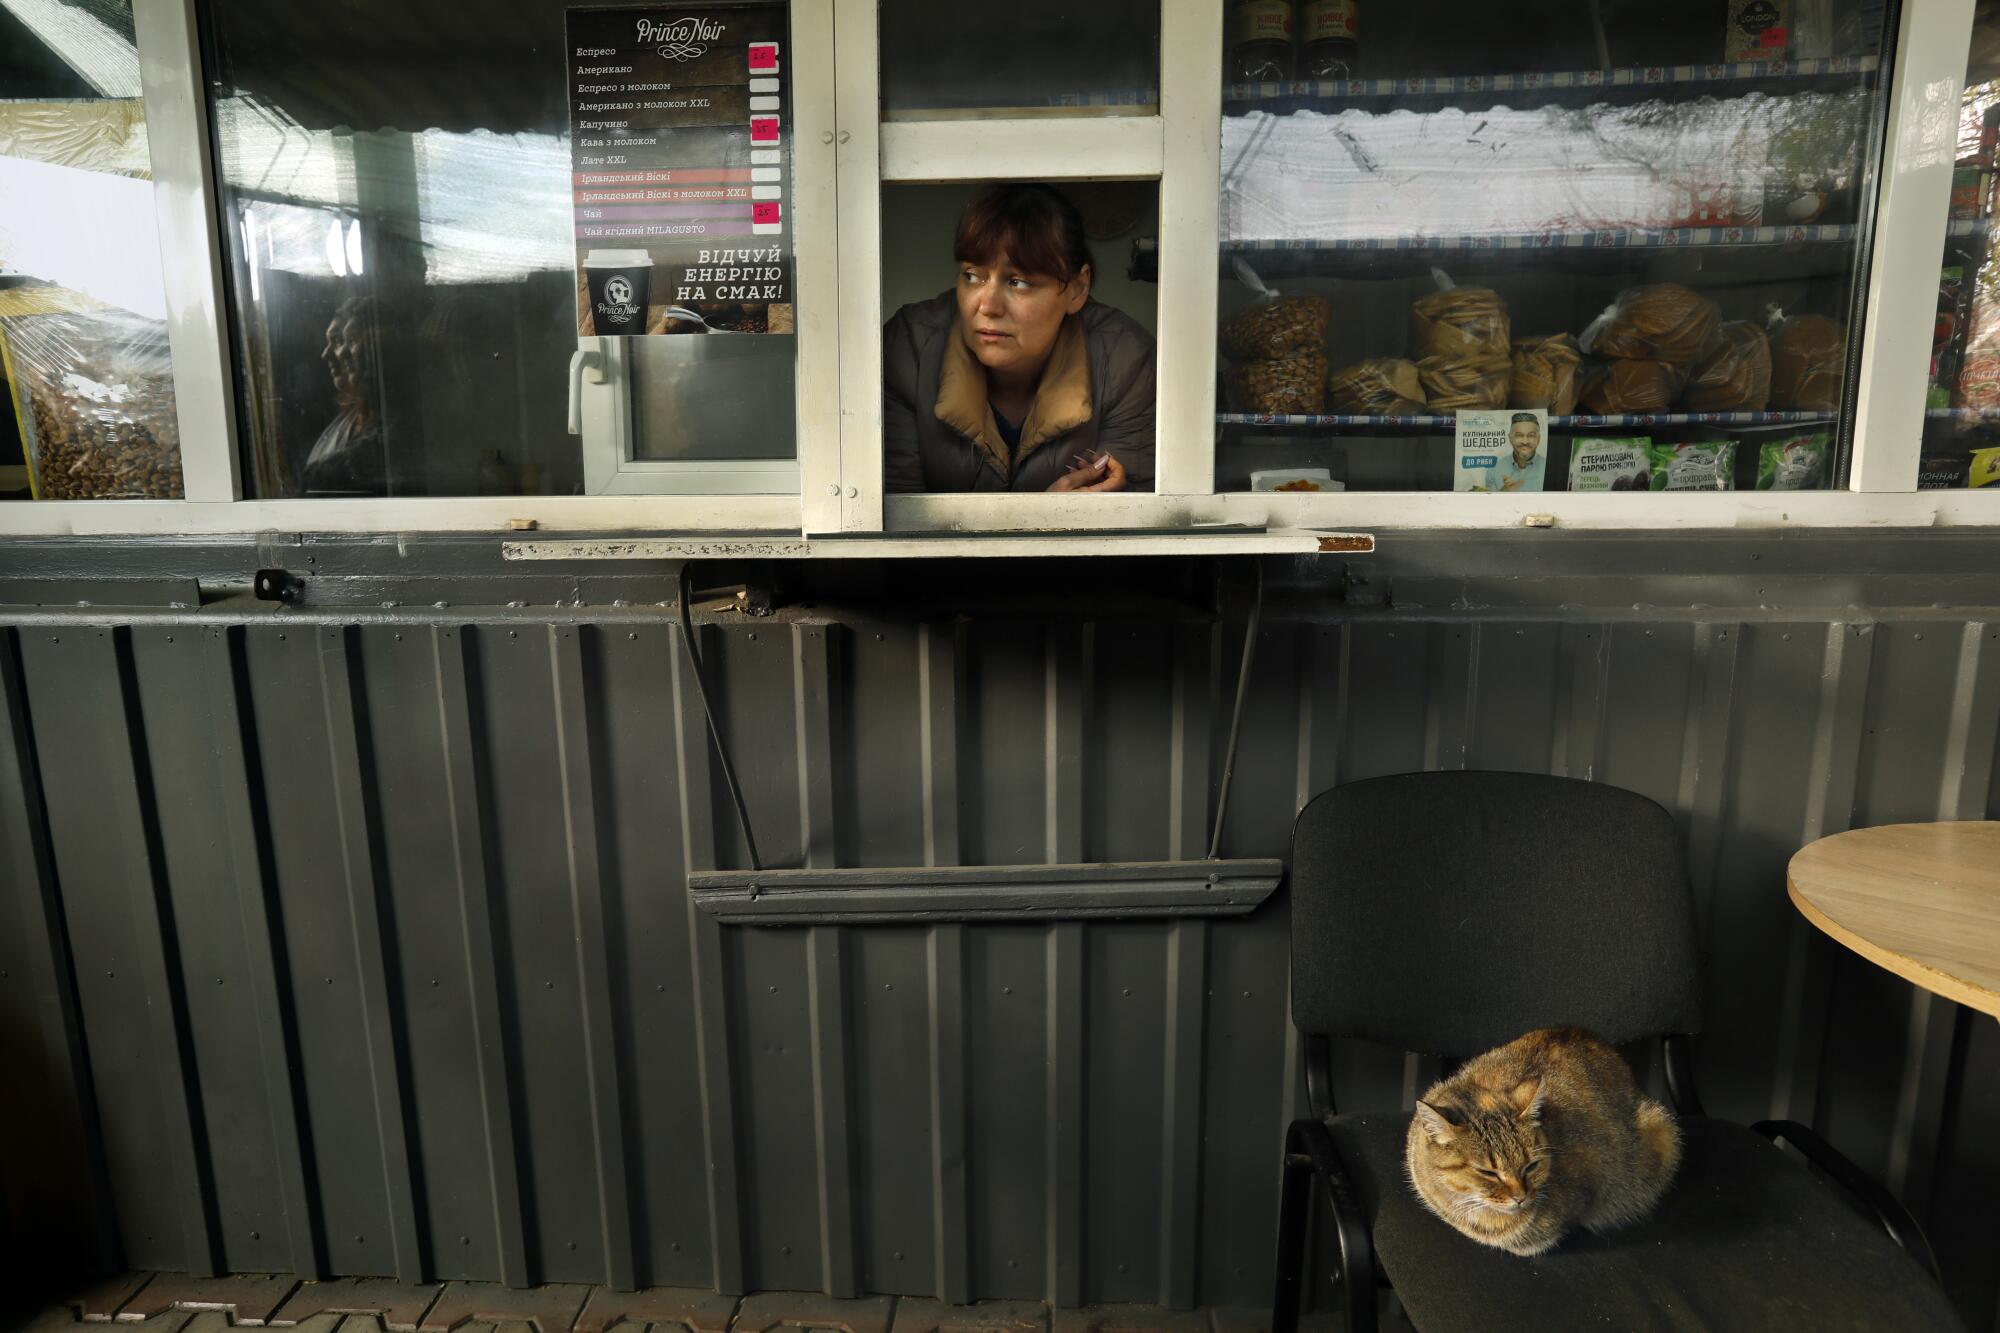 A woman looks out the window of a food stand while a cat sits on a chair outside